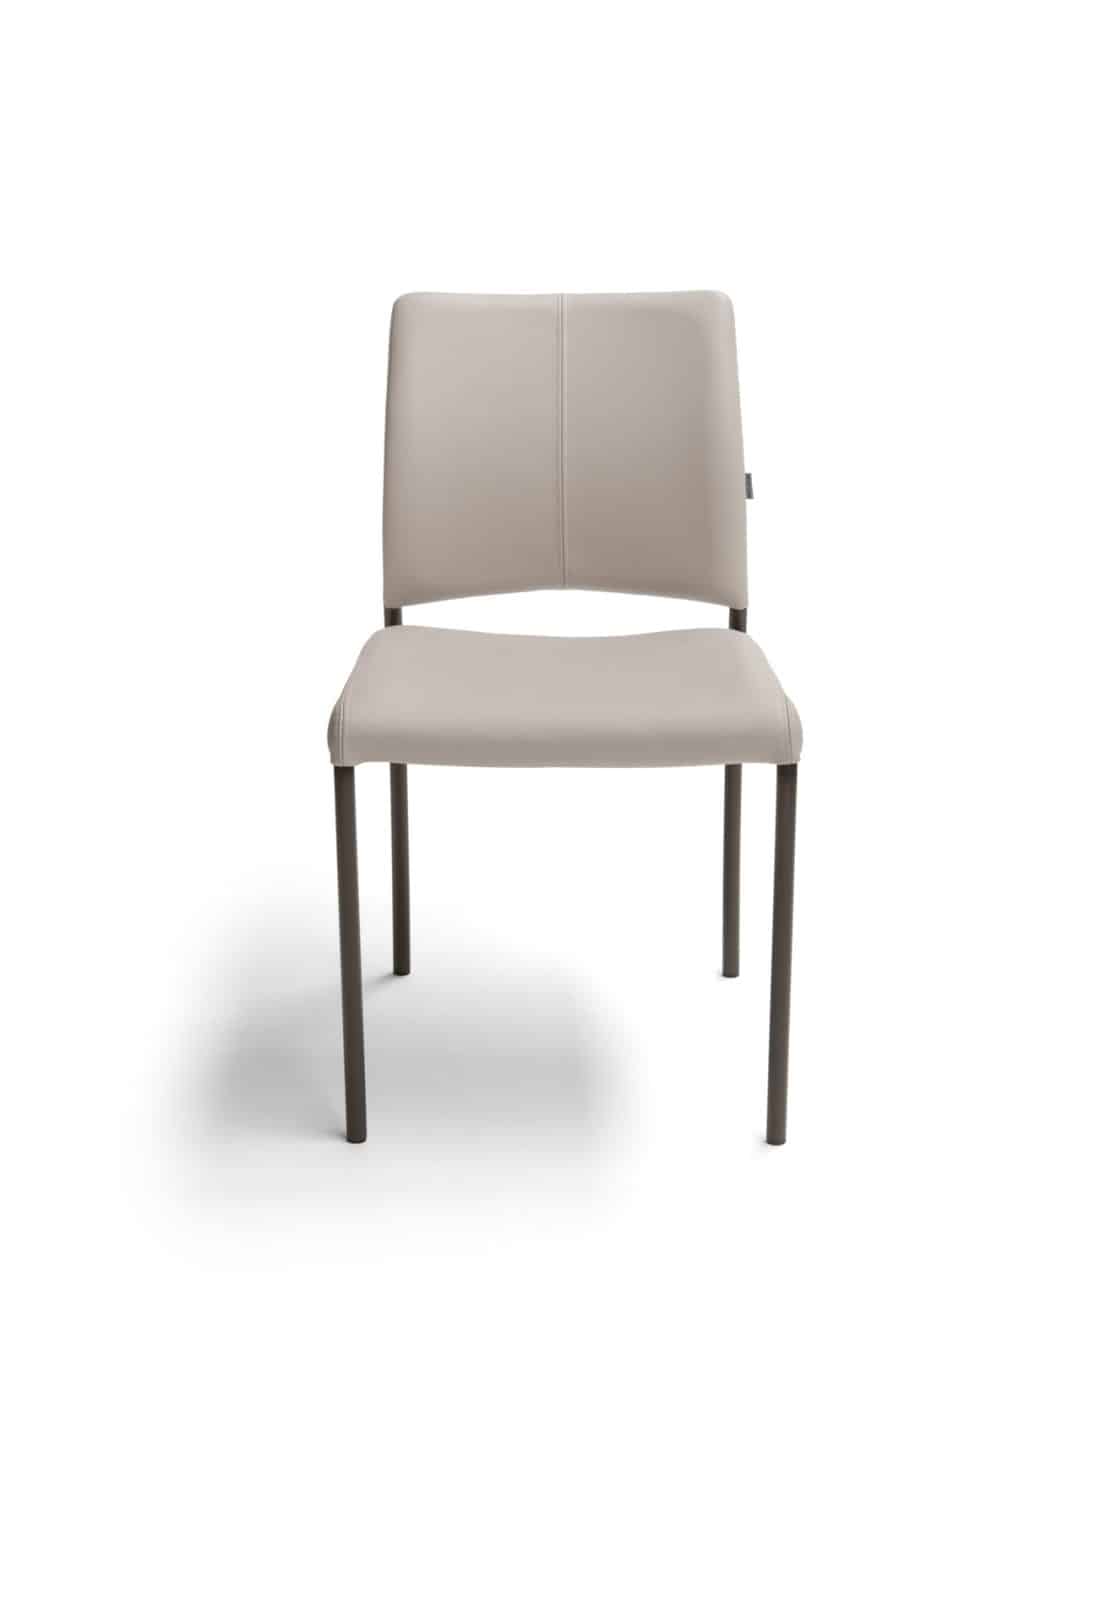 Amore Canteen Chair Breesnewworld Leather Sand-colored